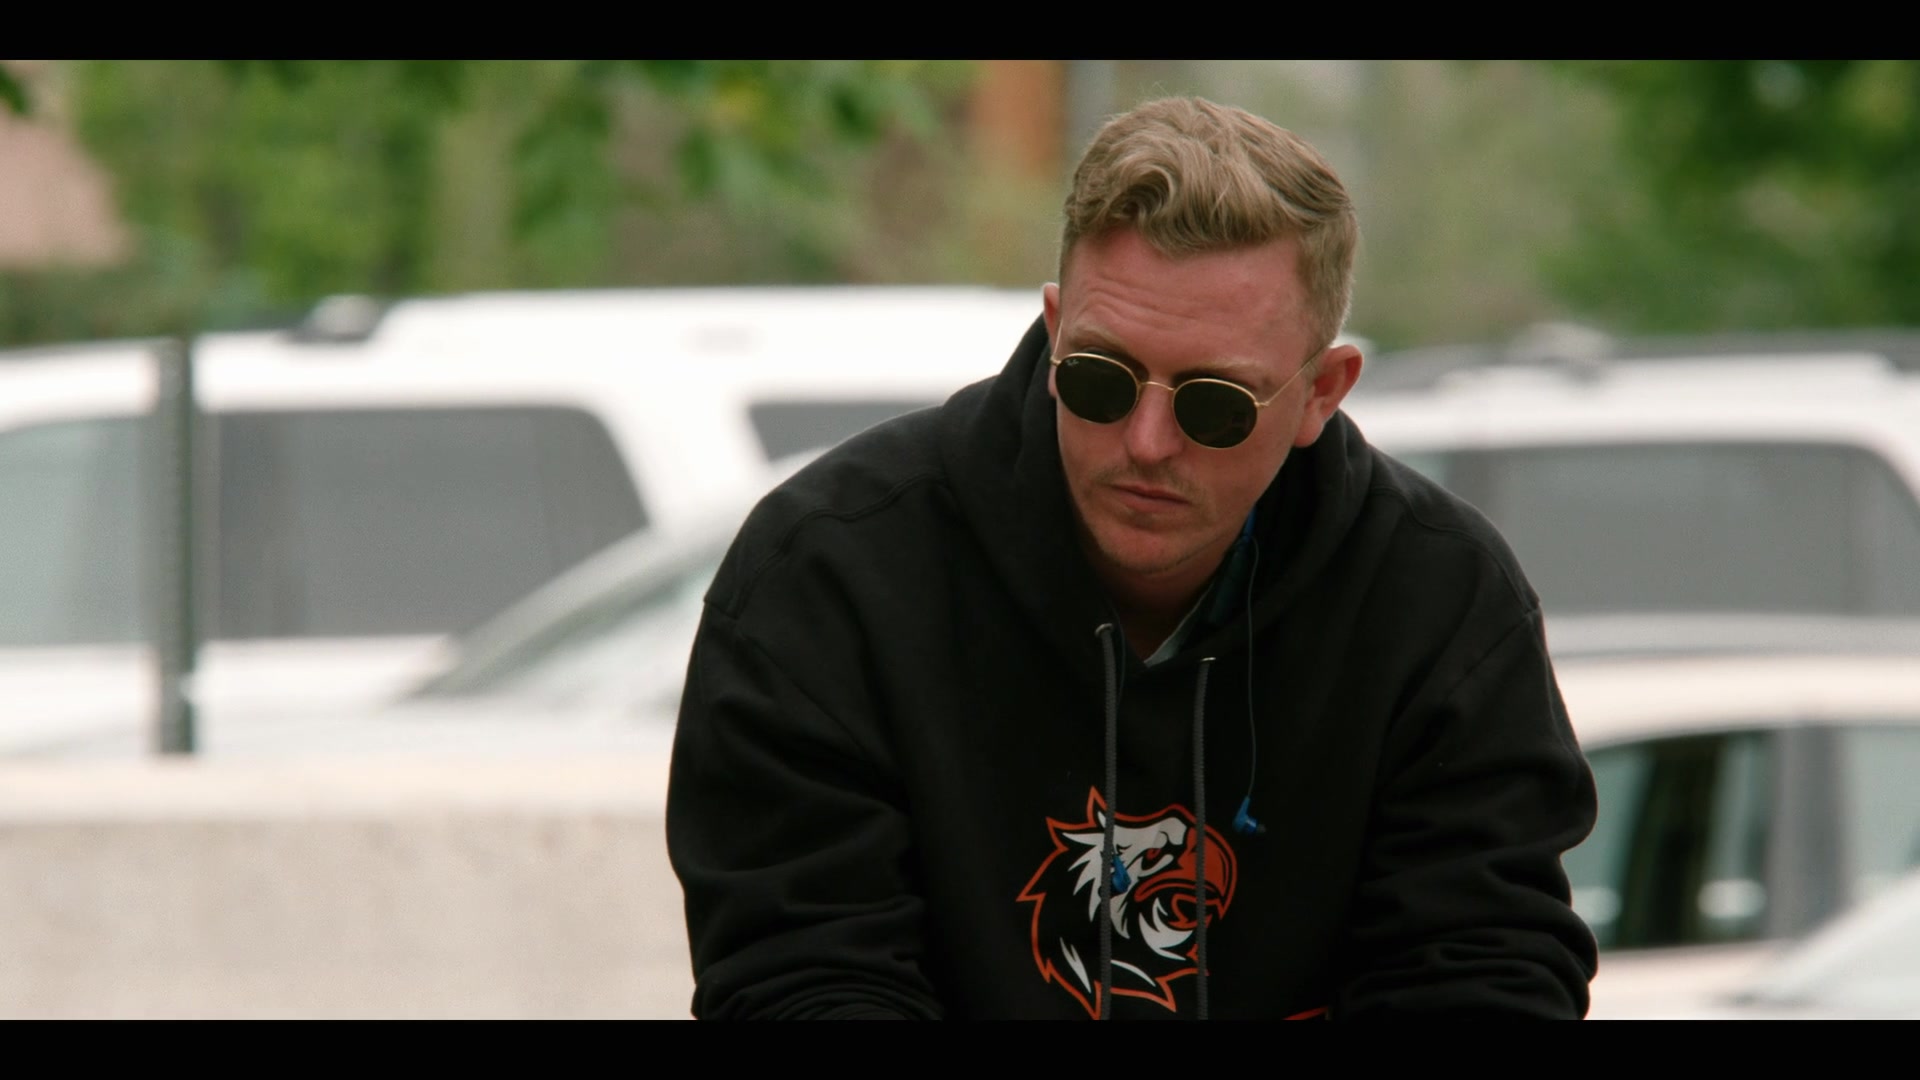 Ray-Ban Round Sunglasses For Men In Yellowstone S03E01 